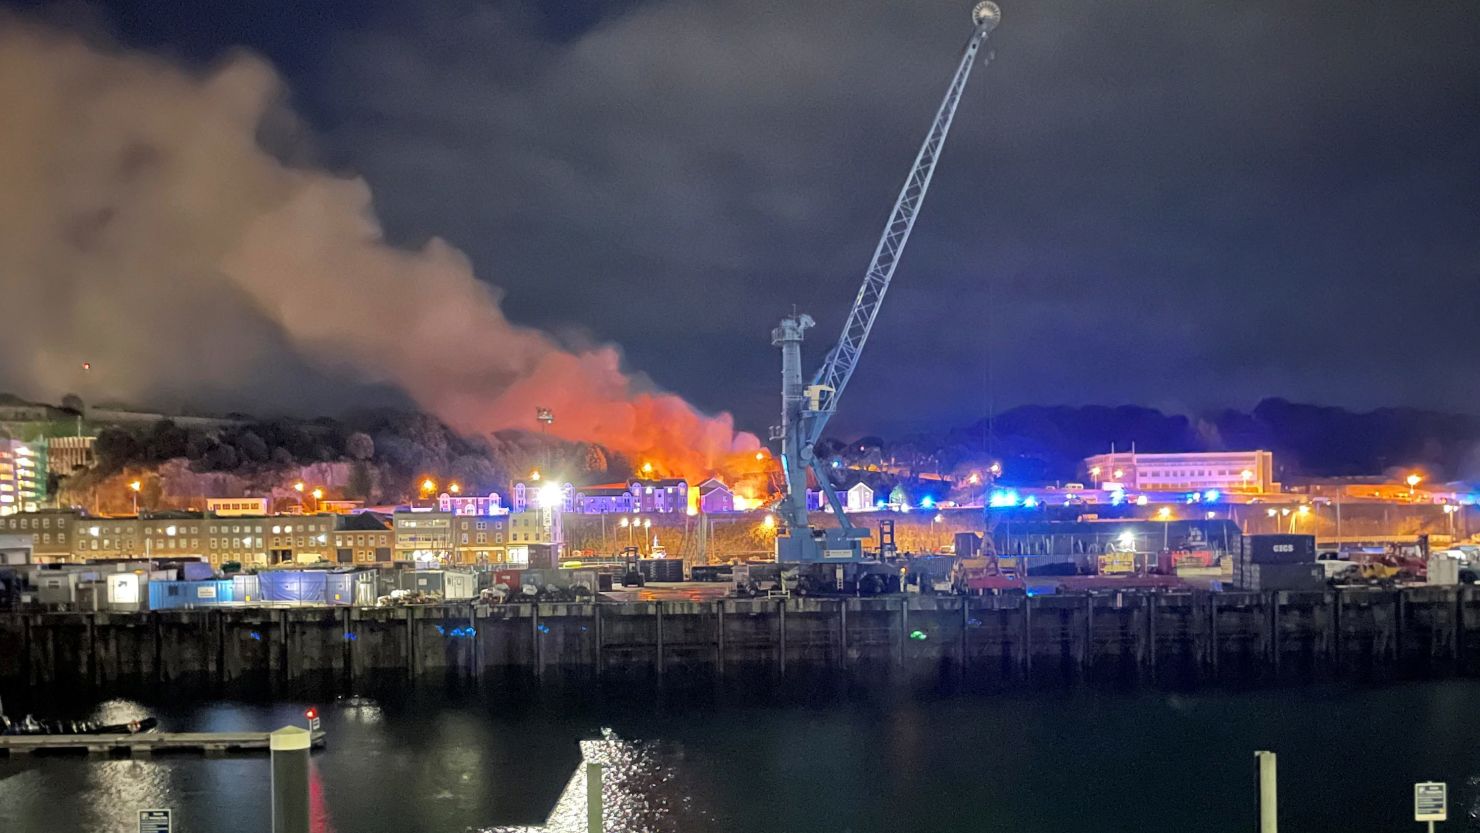 Smoke rises above the scene of an explosion on the British Channel island of Jersey, on Saturday, December 10.